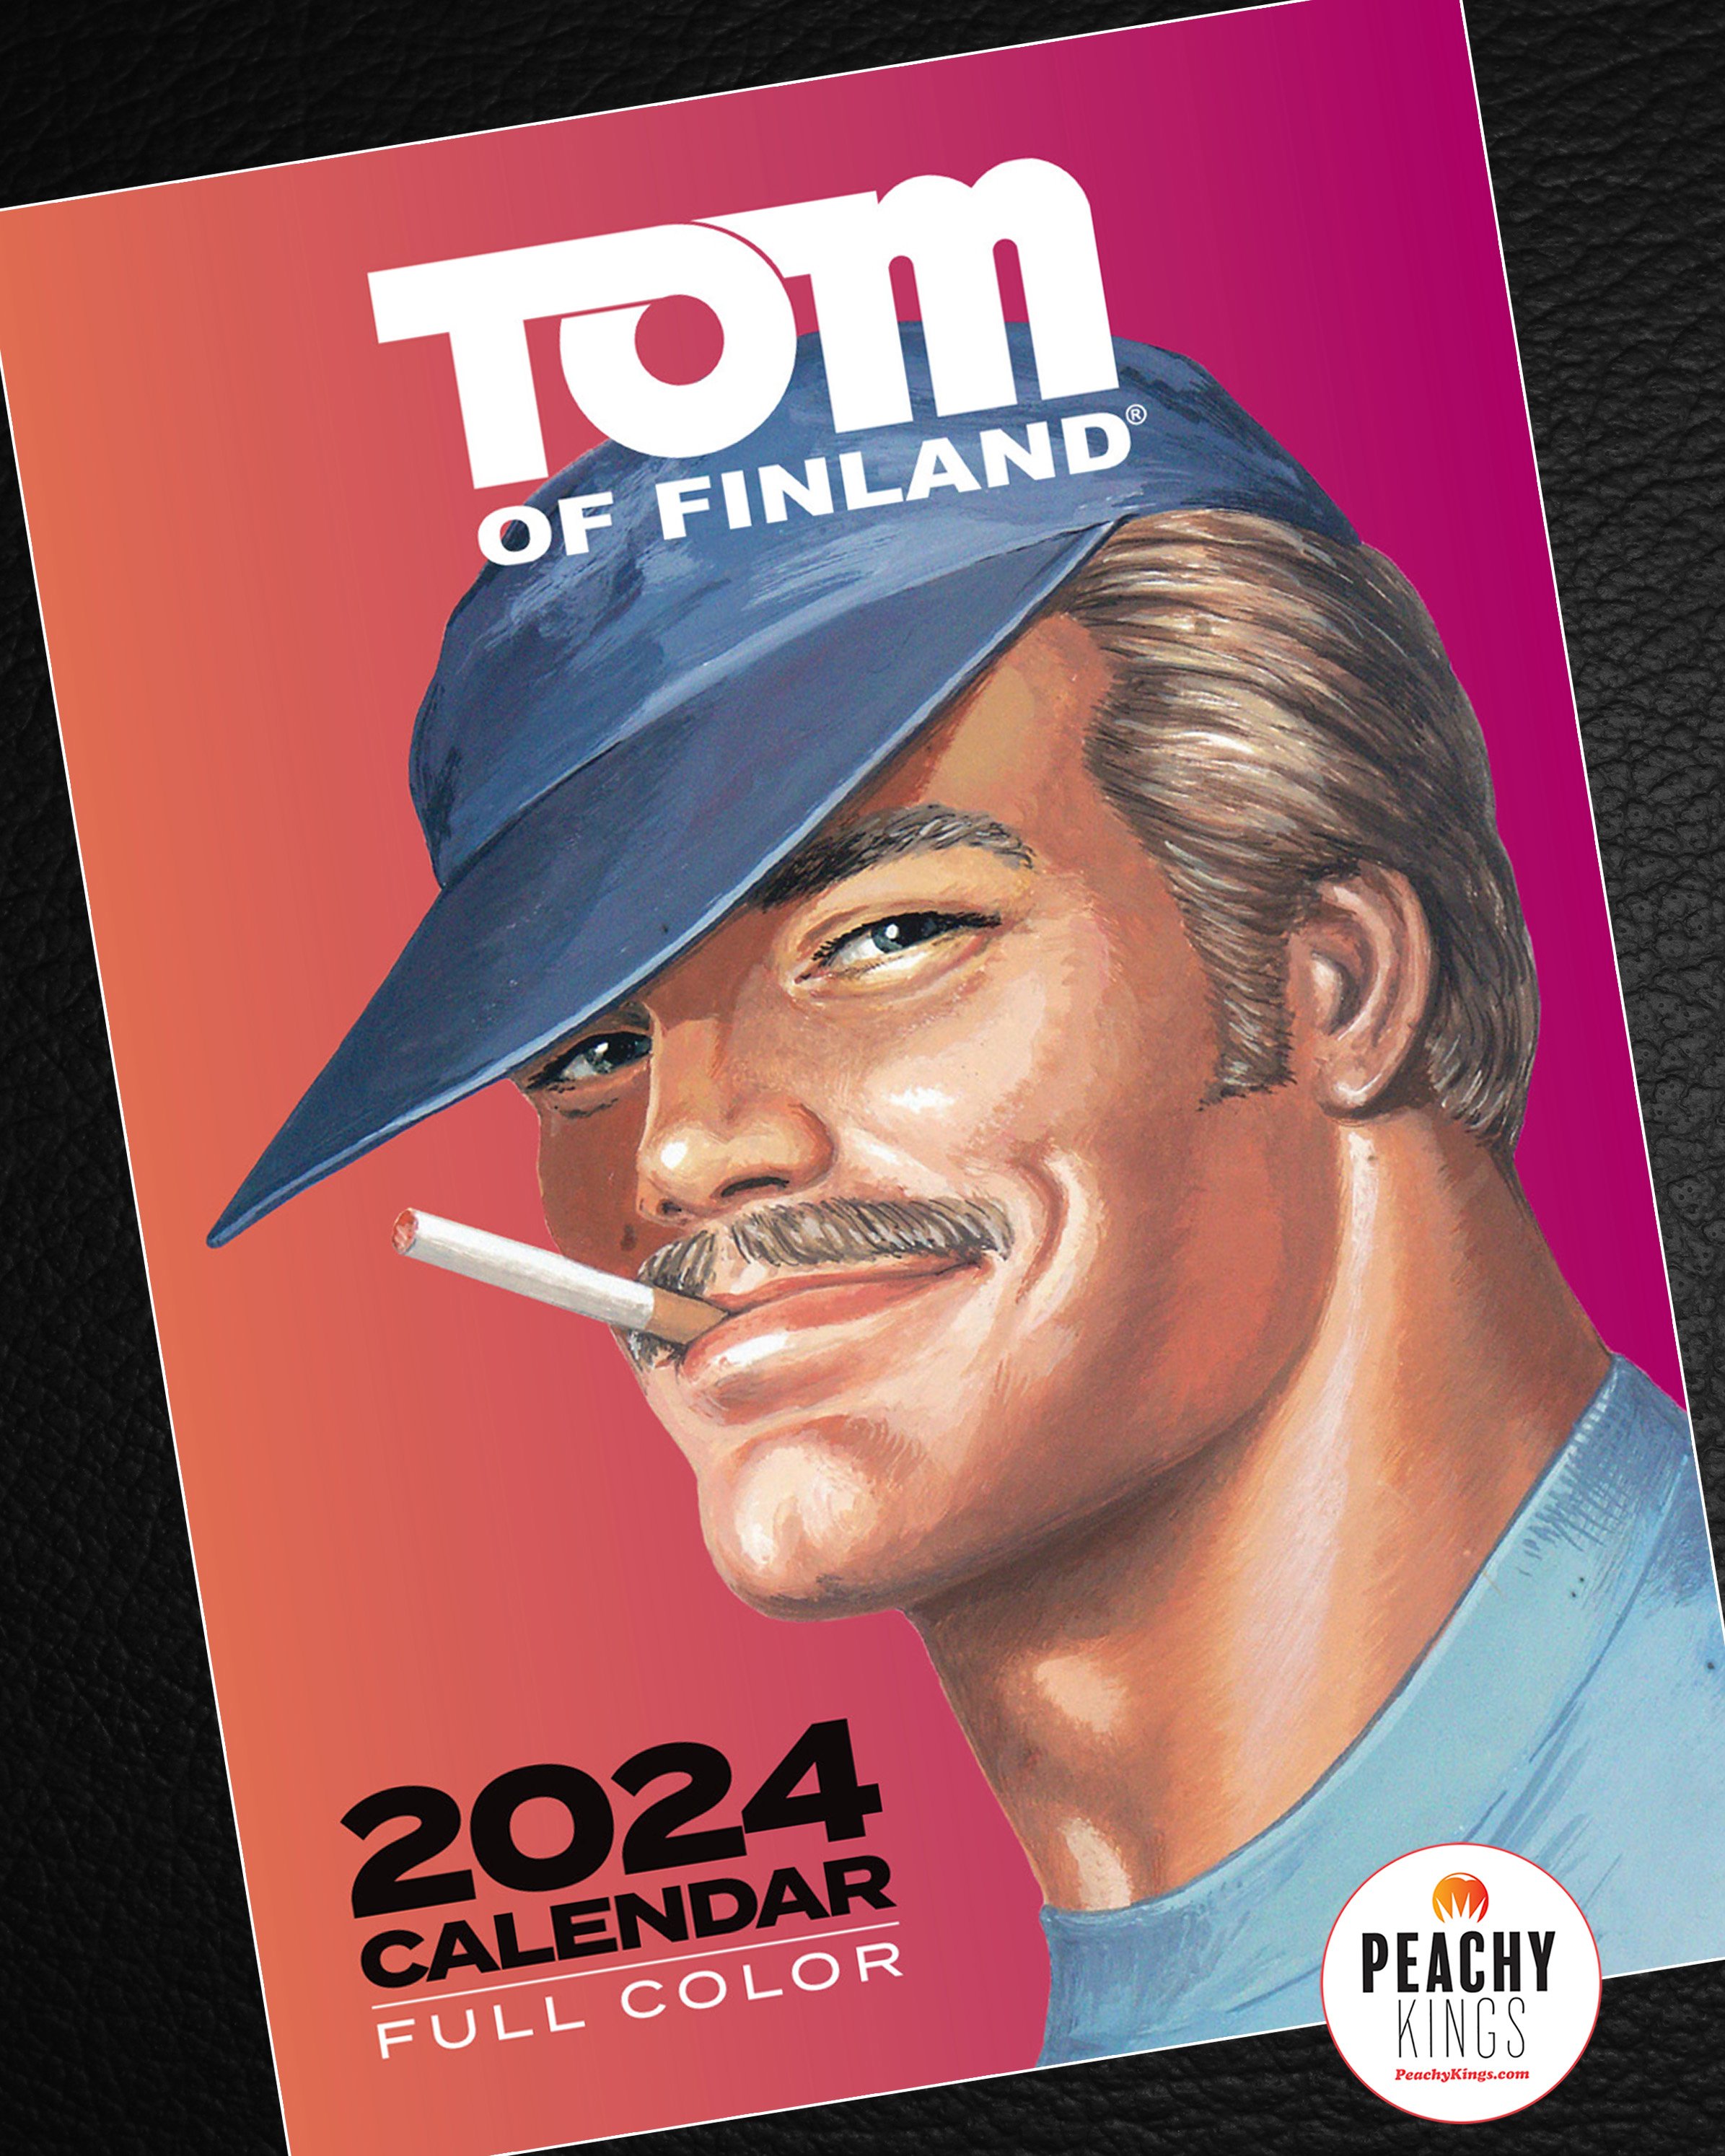 sleigh-ride-tom-of-finland-gay-christmas-card-gay-greeting-cards-by-kweer-cards